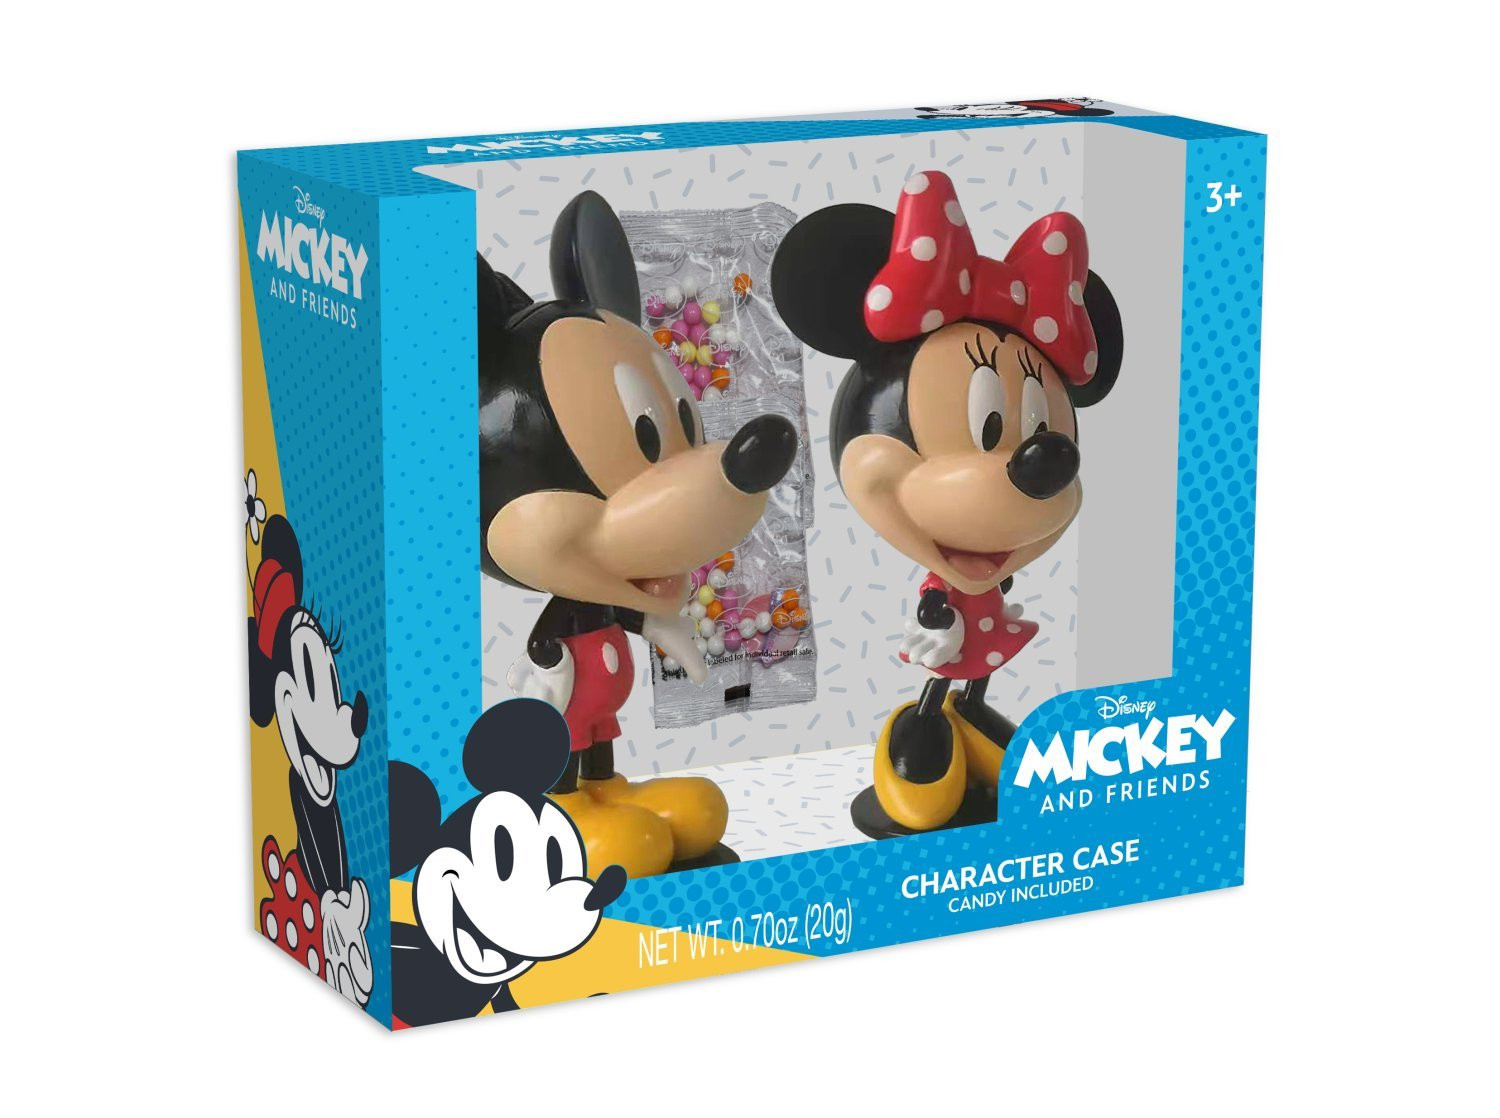 ©Disney Mickey & Minnie Candy Character Case 2-pack